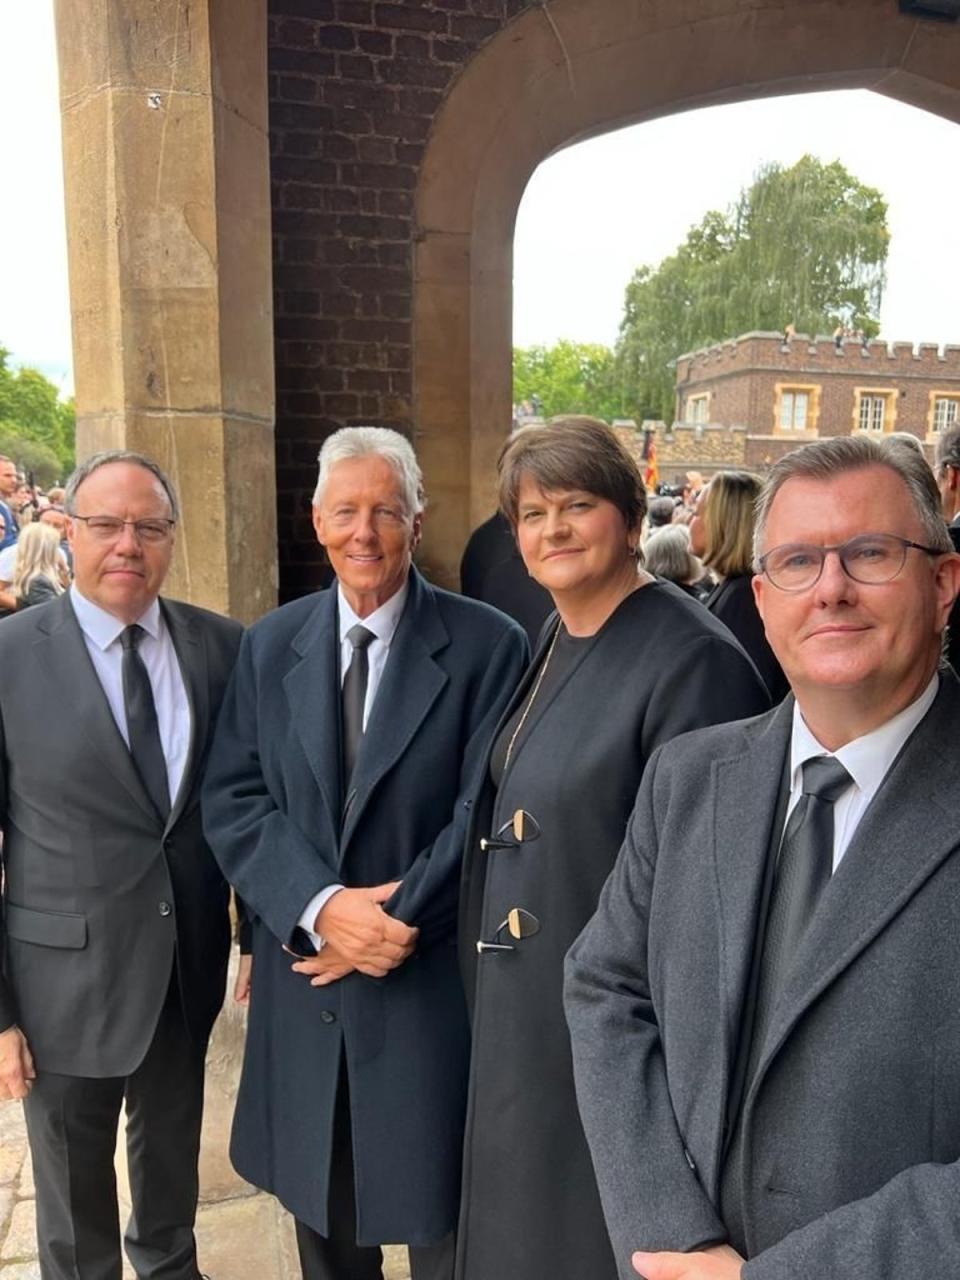 (Left to right) Accession Council members, former DUP deputy leader Lord Dodds, former DUP leaders Peter Robinson and Dame Arlene Foster, with current DUP leader Sir Jeffrey Donaldson, outside St James’s Palace, London (Sir Jeffrey Donaldson/PA) (PA Media)